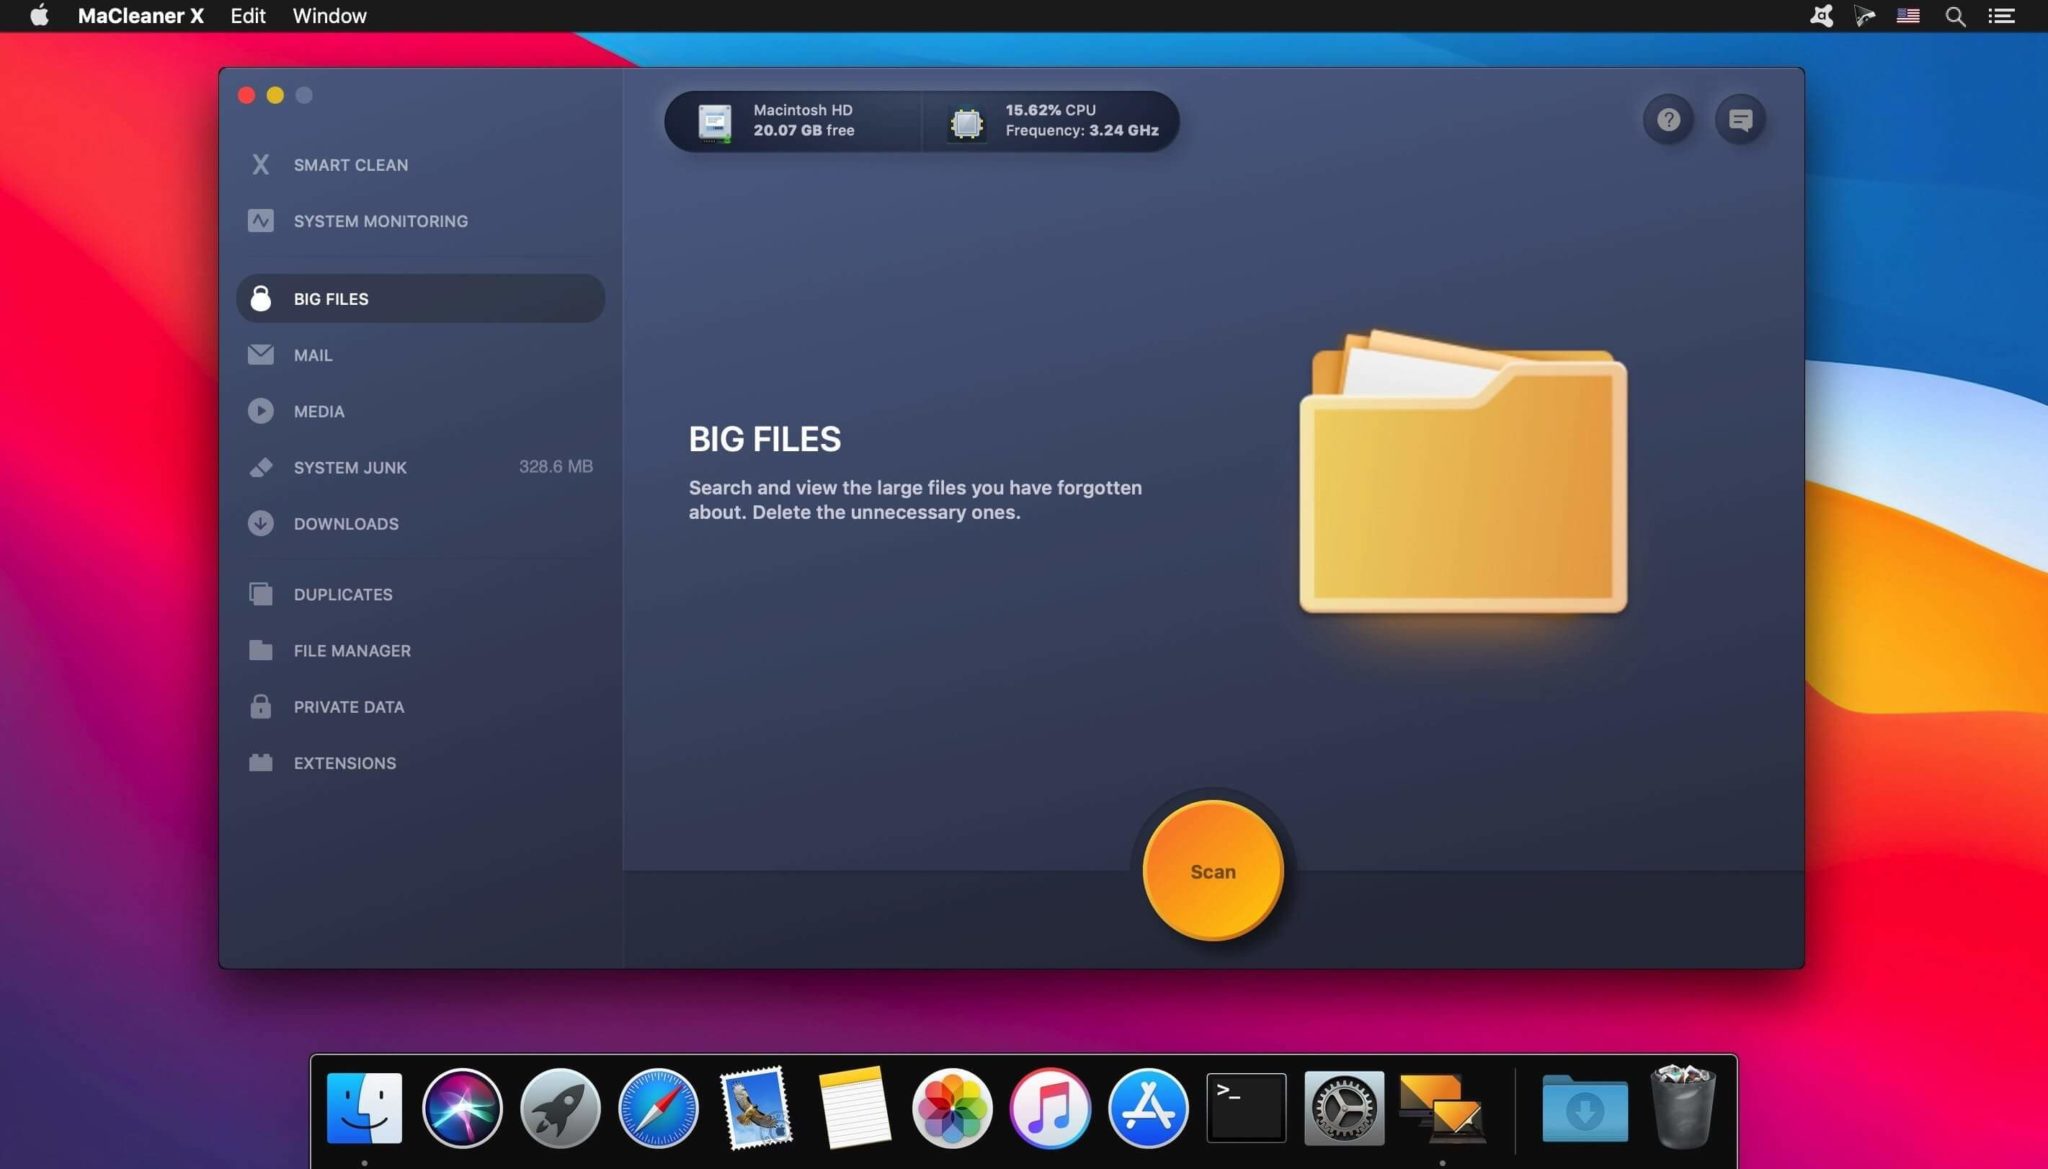 ccleaner for mac 10.11.4